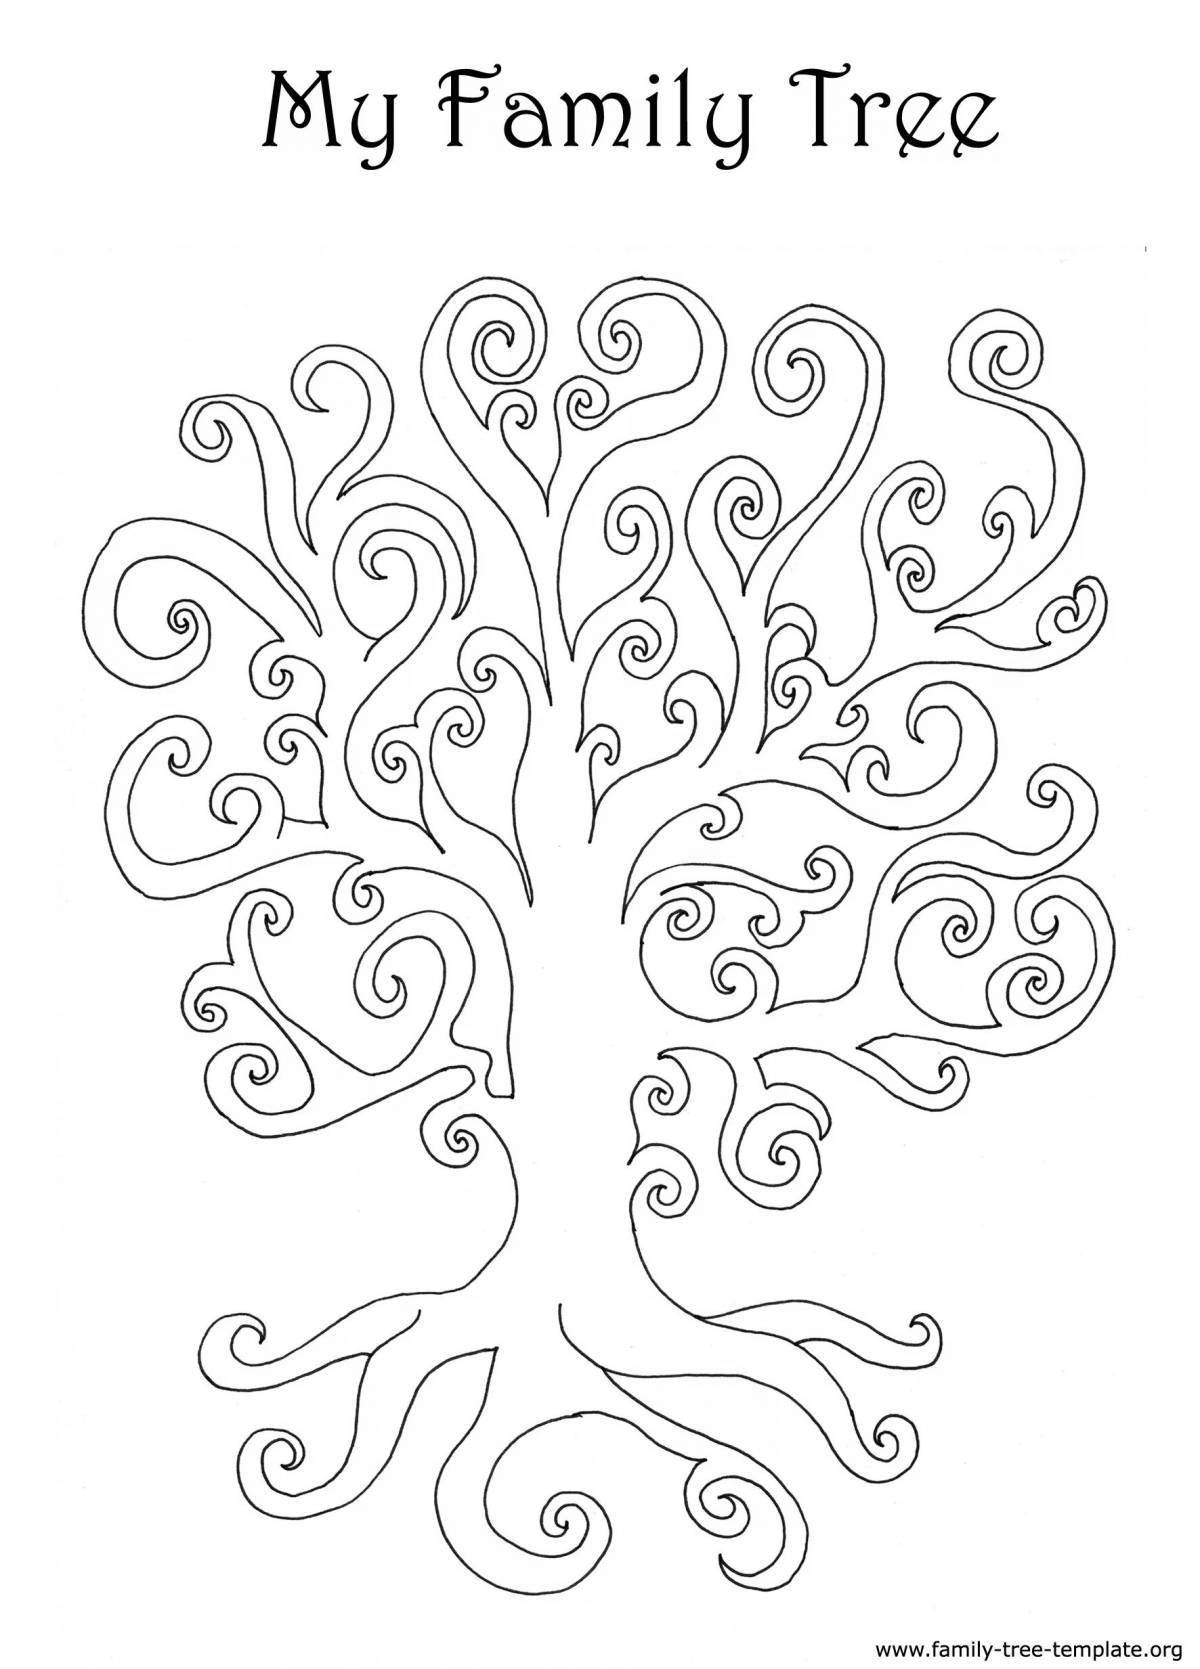 Charming family tree coloring book